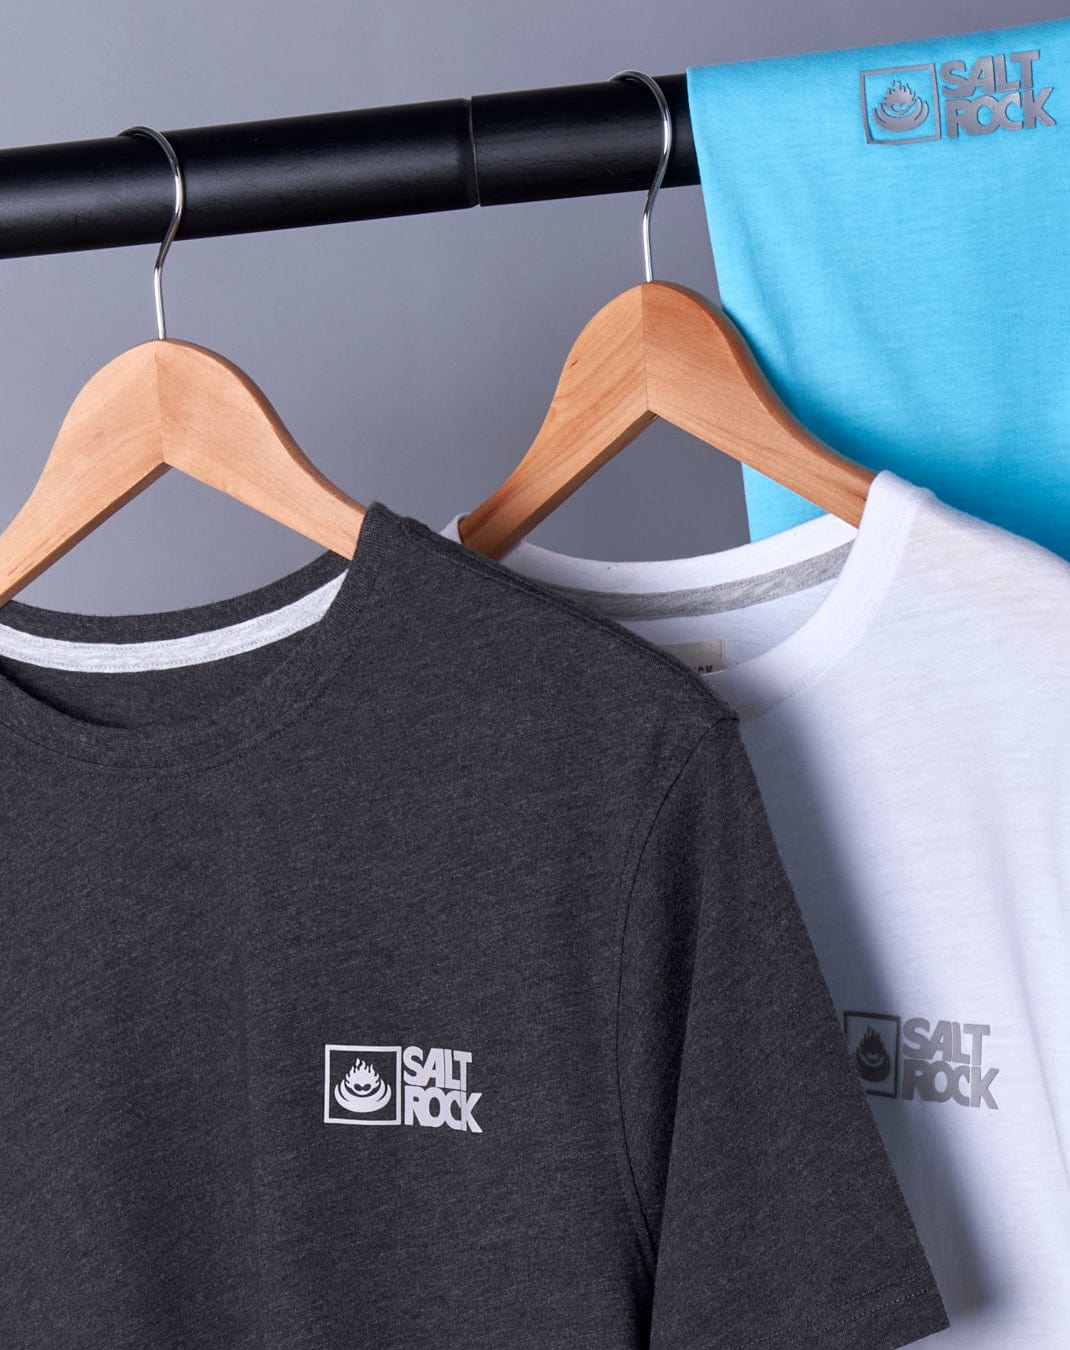 Two Saltrock Corp 20 men's short sleeve t-shirts hanging on a rack, an everyday essential.